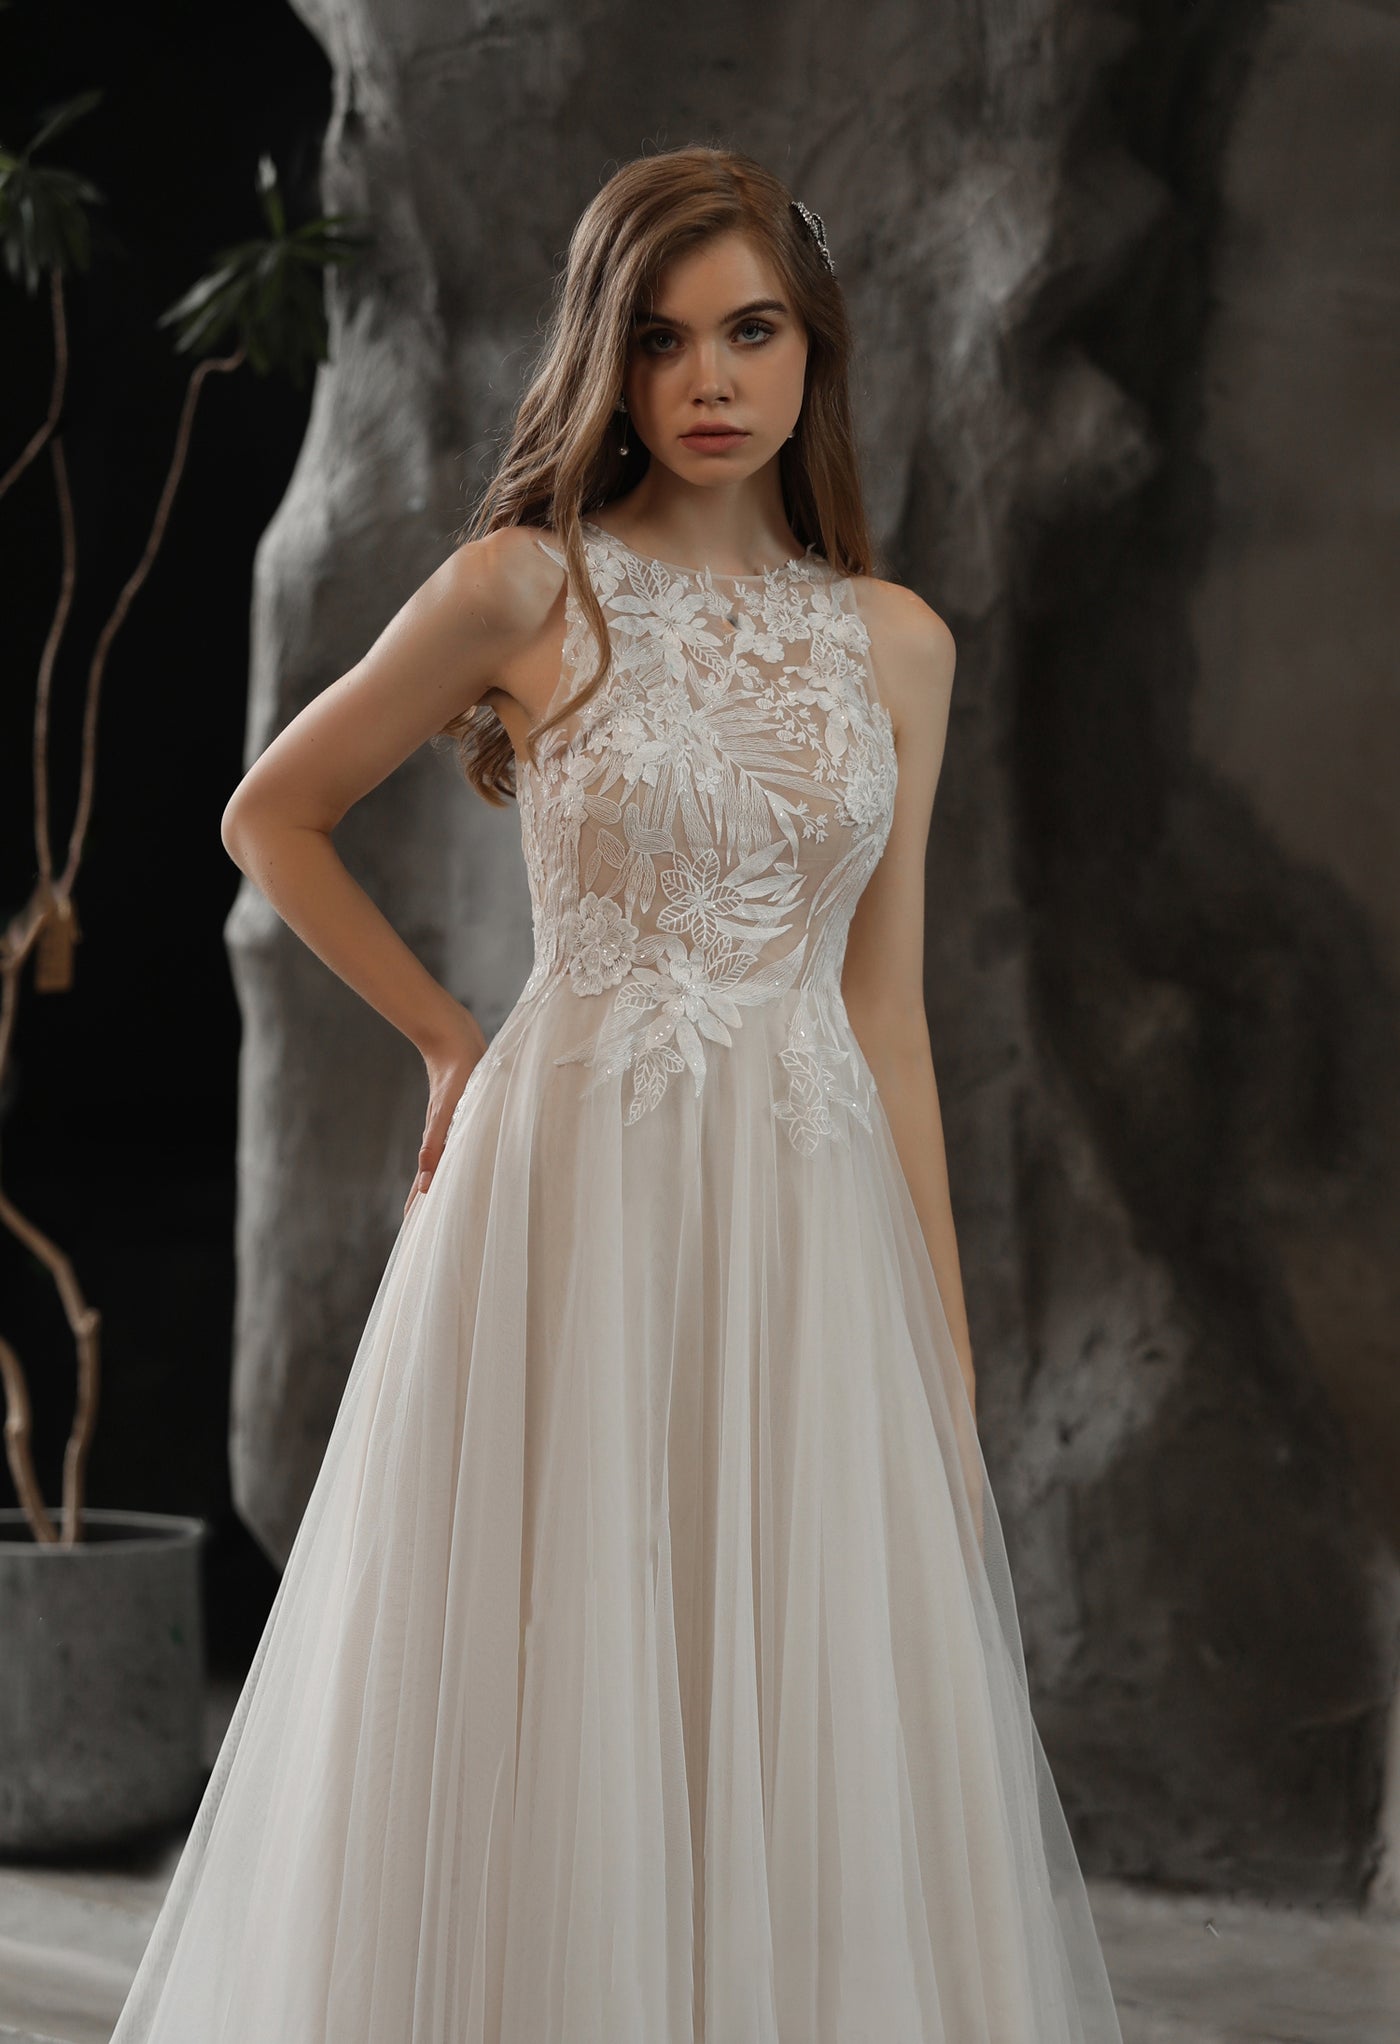 The bride is wearing a white Bergamot Bridal High Neck A-line Wedding Gown with Sequined Lace.